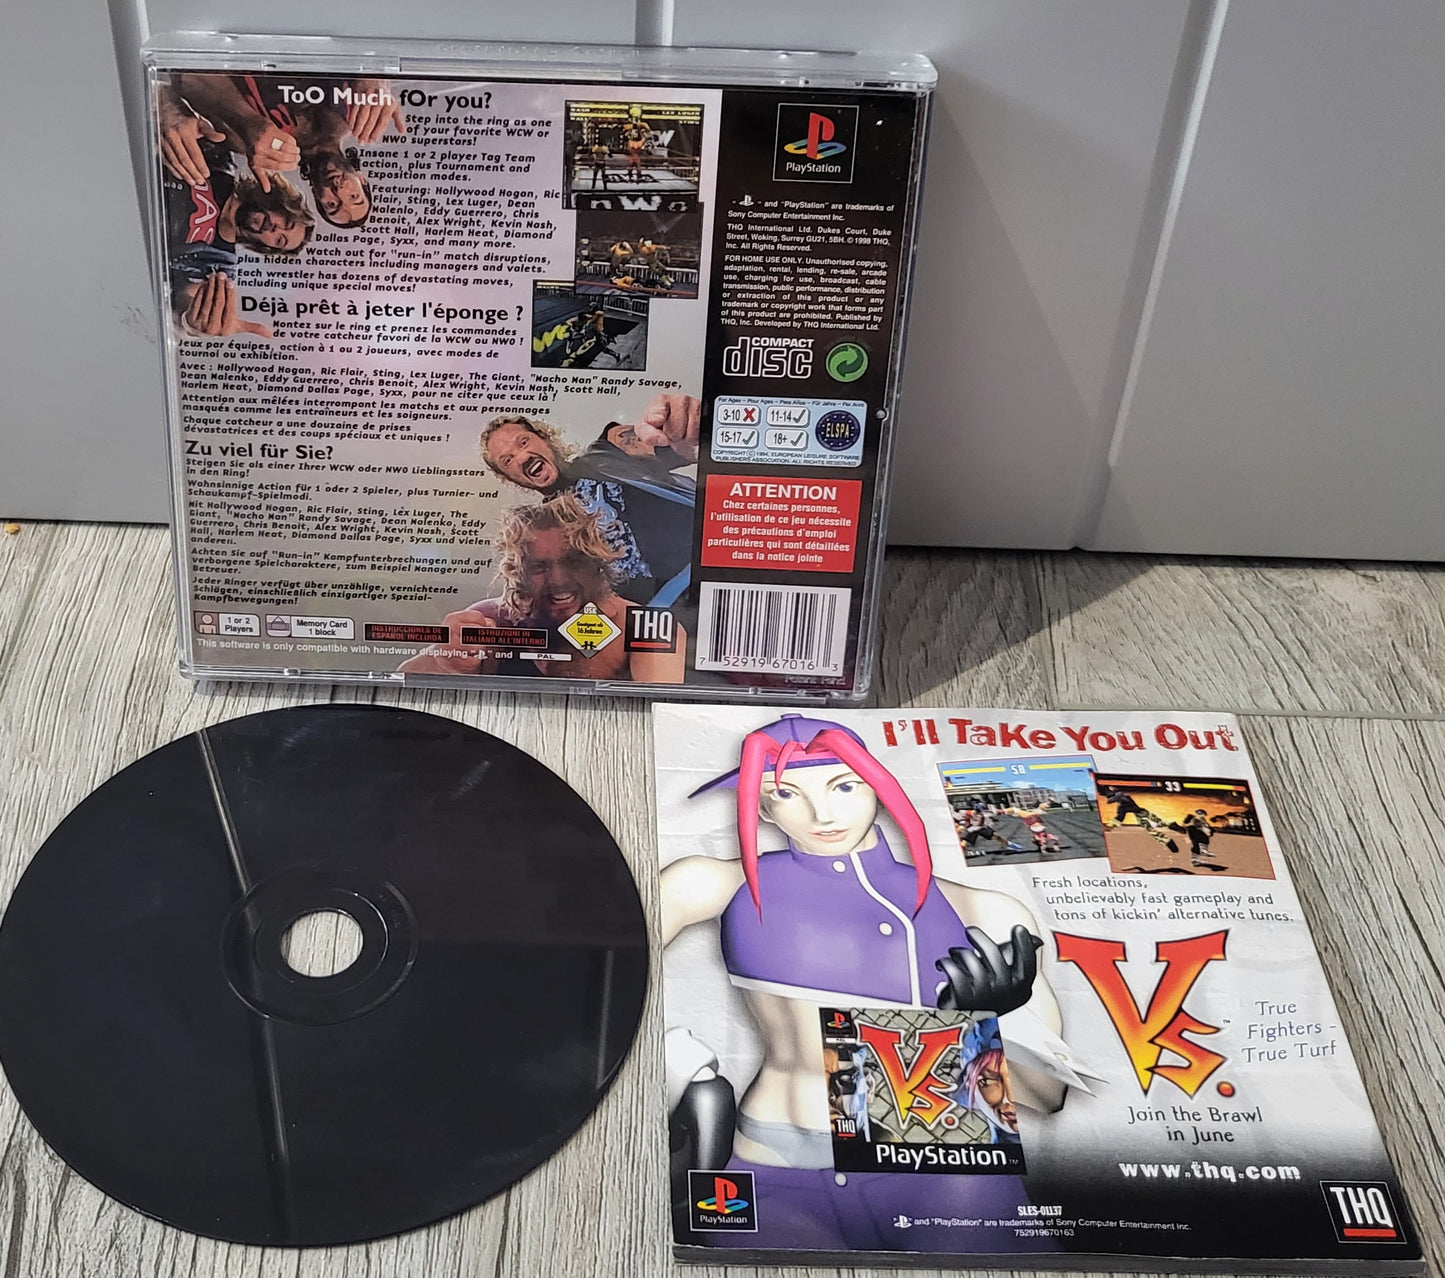 WCW Nitro Sony Playstation 1 (PS1) RARE Game